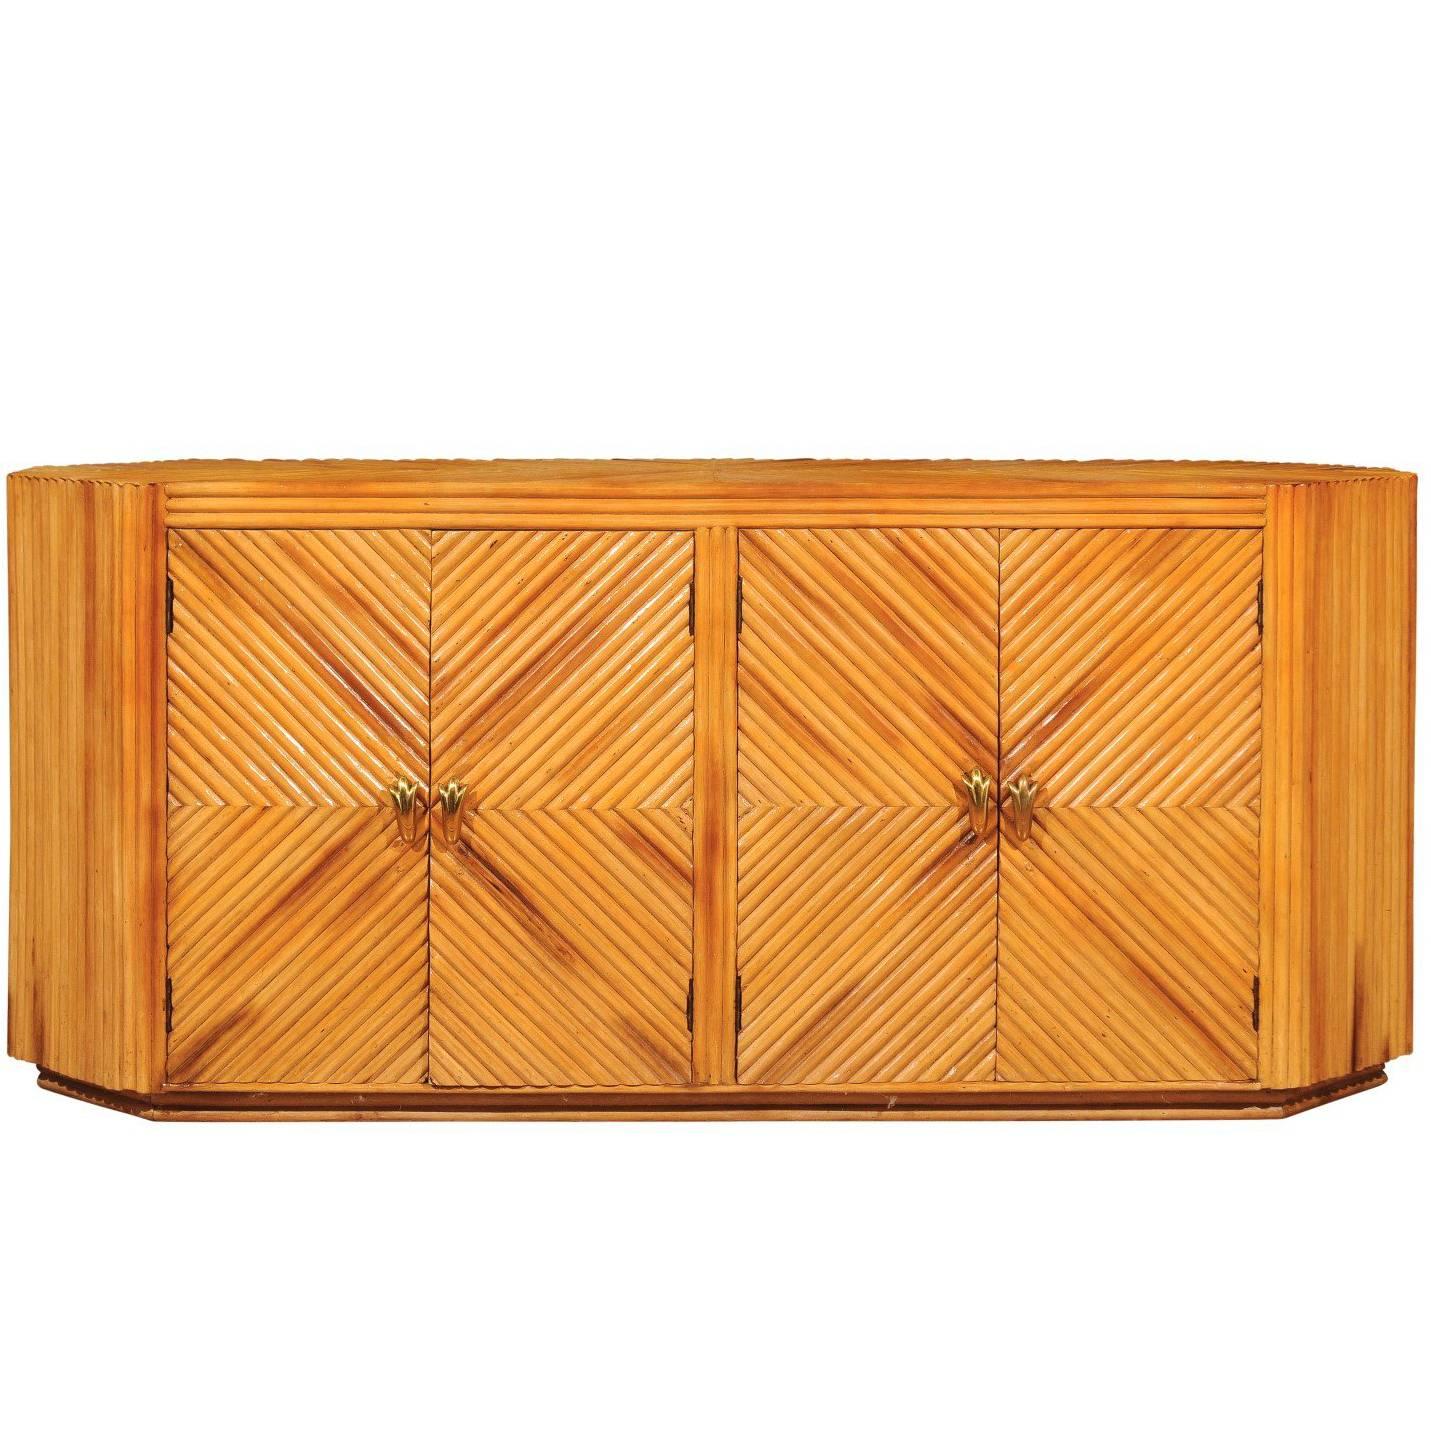 Fabulous Restored Vintage Bamboo Cabinet with Tulip Style Hardware